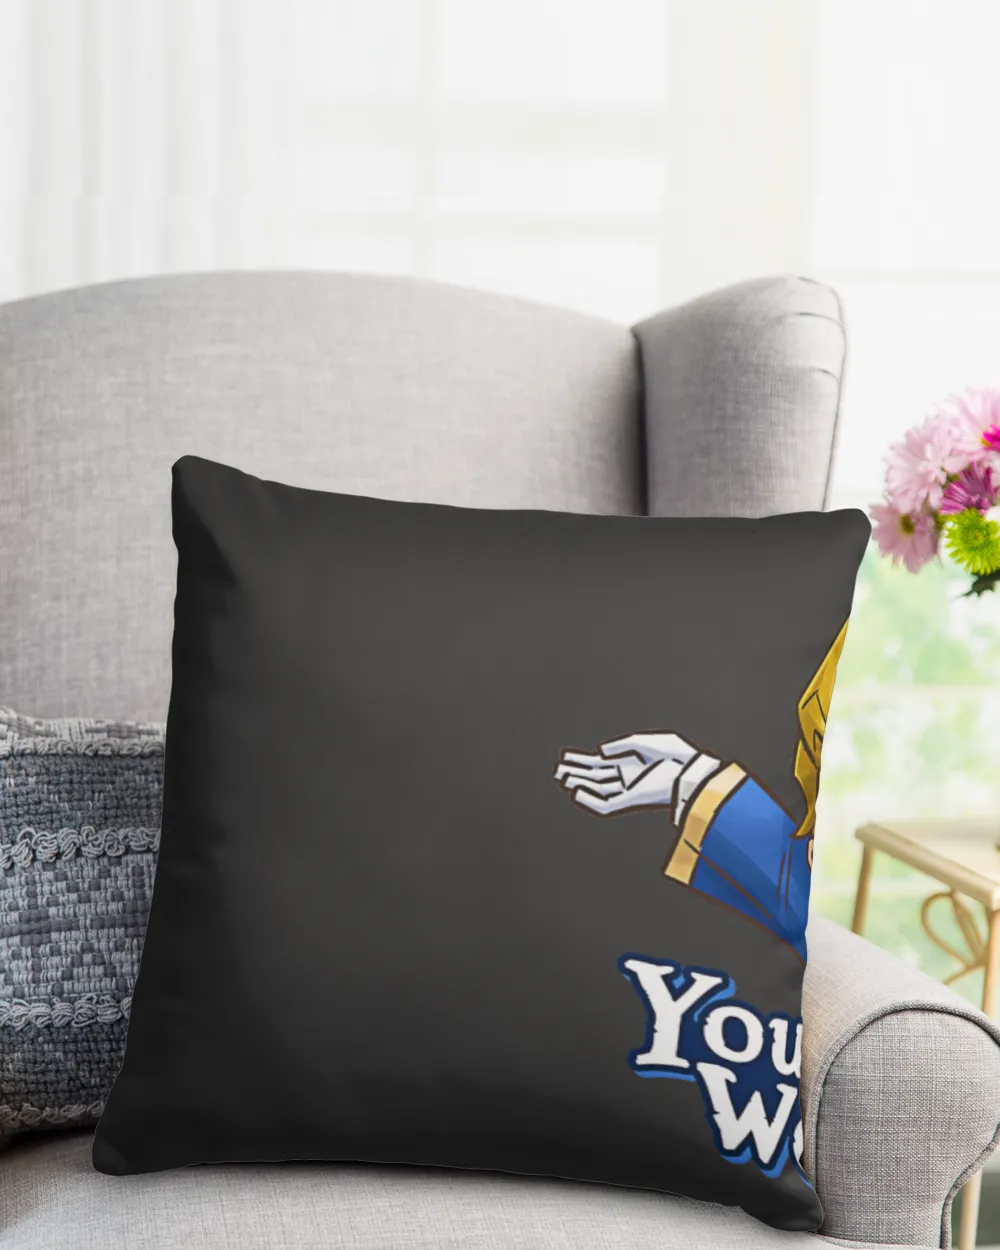 You are welcome -  bitcoin style - pillow crypto